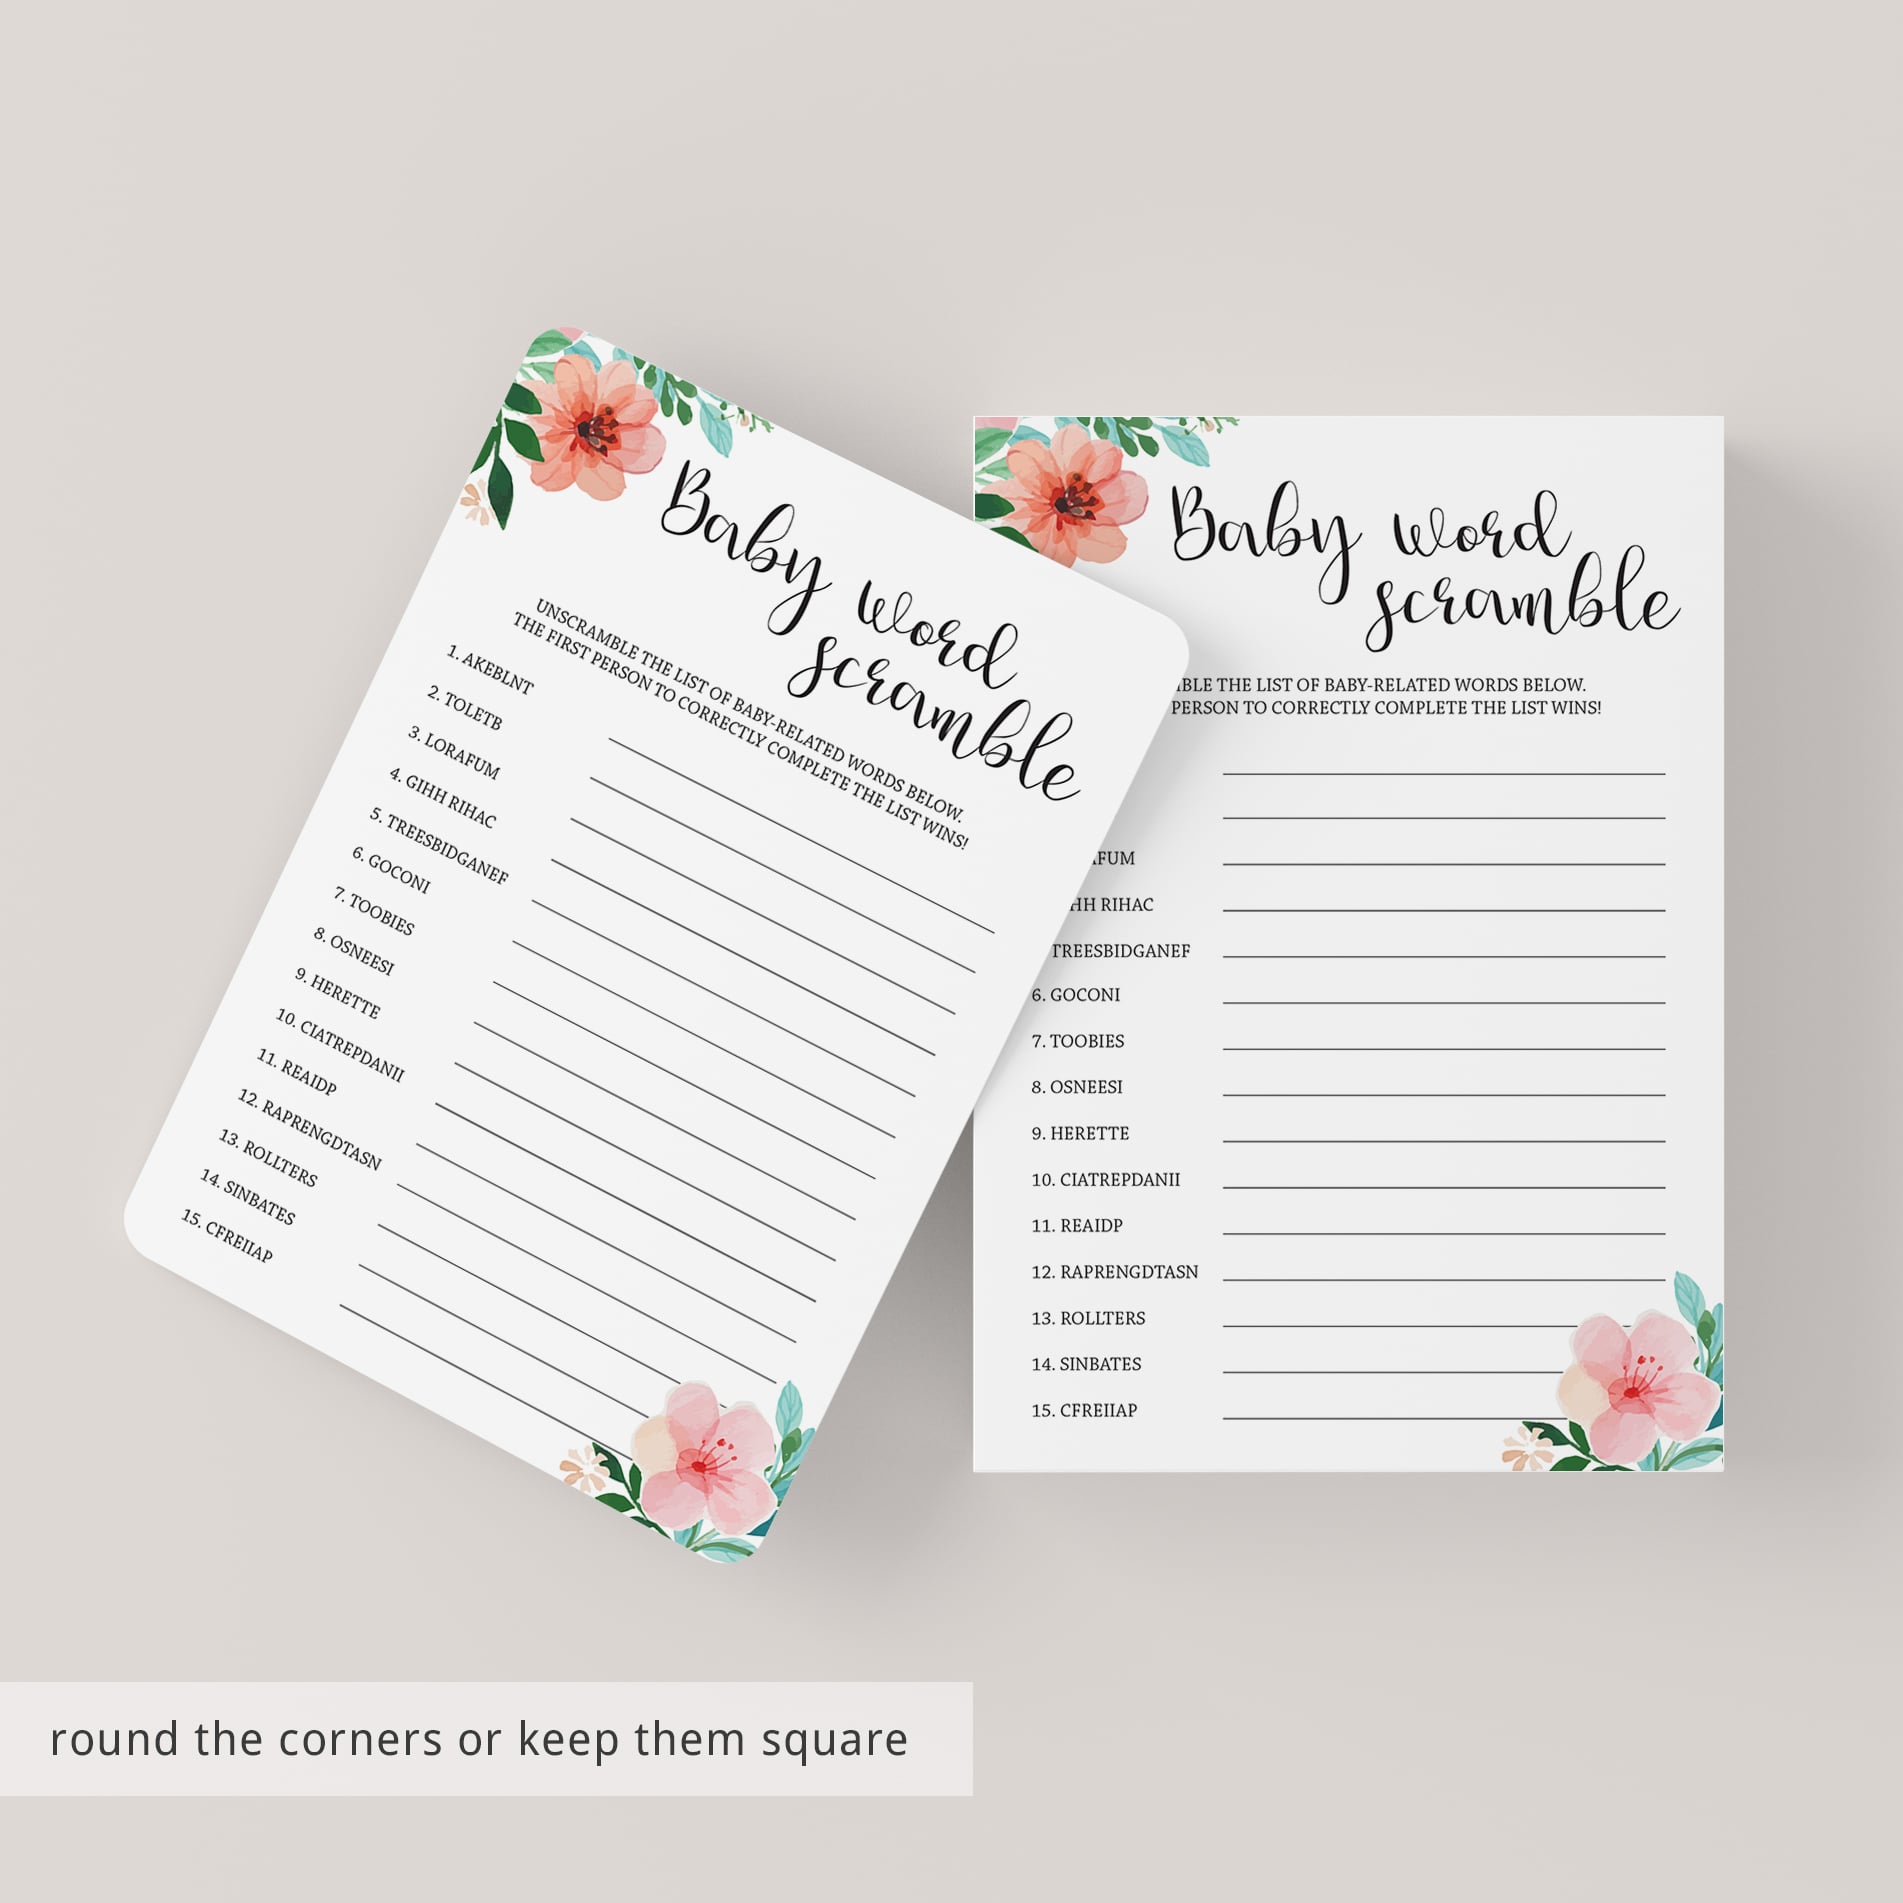 Printable baby shower games for girl baby word scramble by LittleSizzle